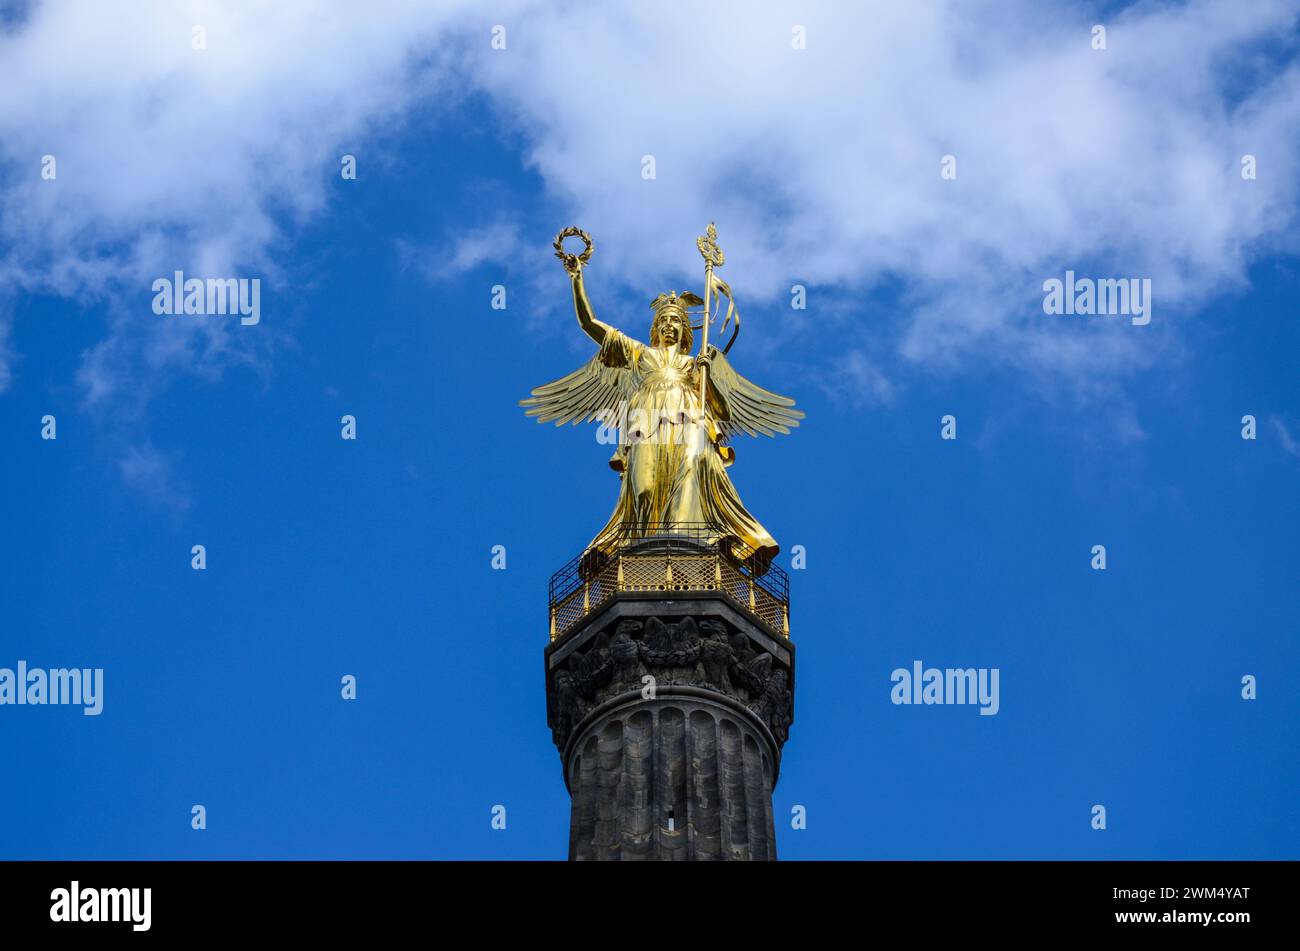 Siegessaule or Victory column with golden statue in Berlin, Germany. Clouds passing behind monument. Major tourist spot and sight in city. Stock Photo